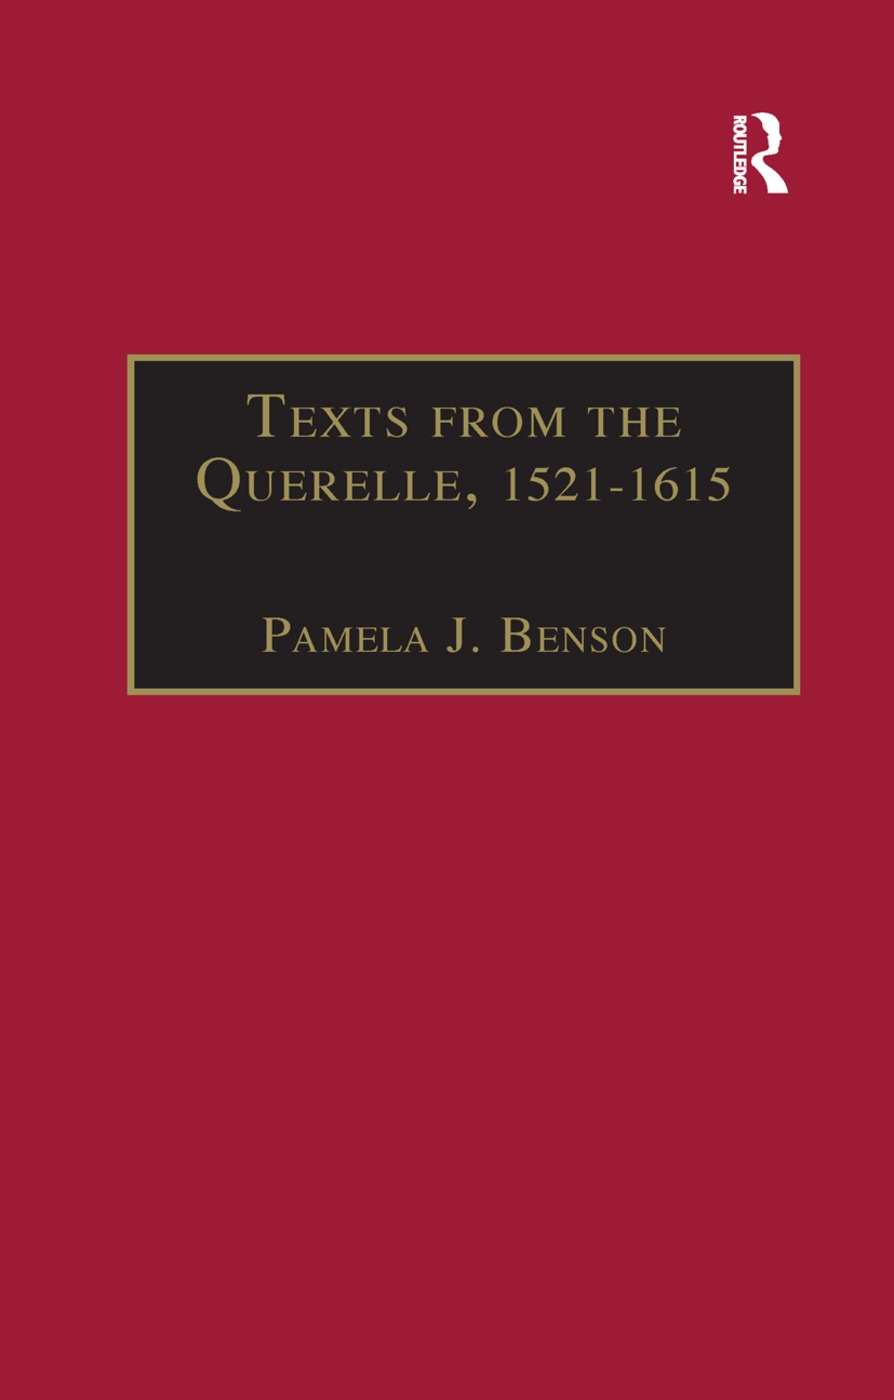 Texts from the Querelle, 1521-1615: Essential Works for the Study of Early Modern Women: Series III, Part Two, Volume 1